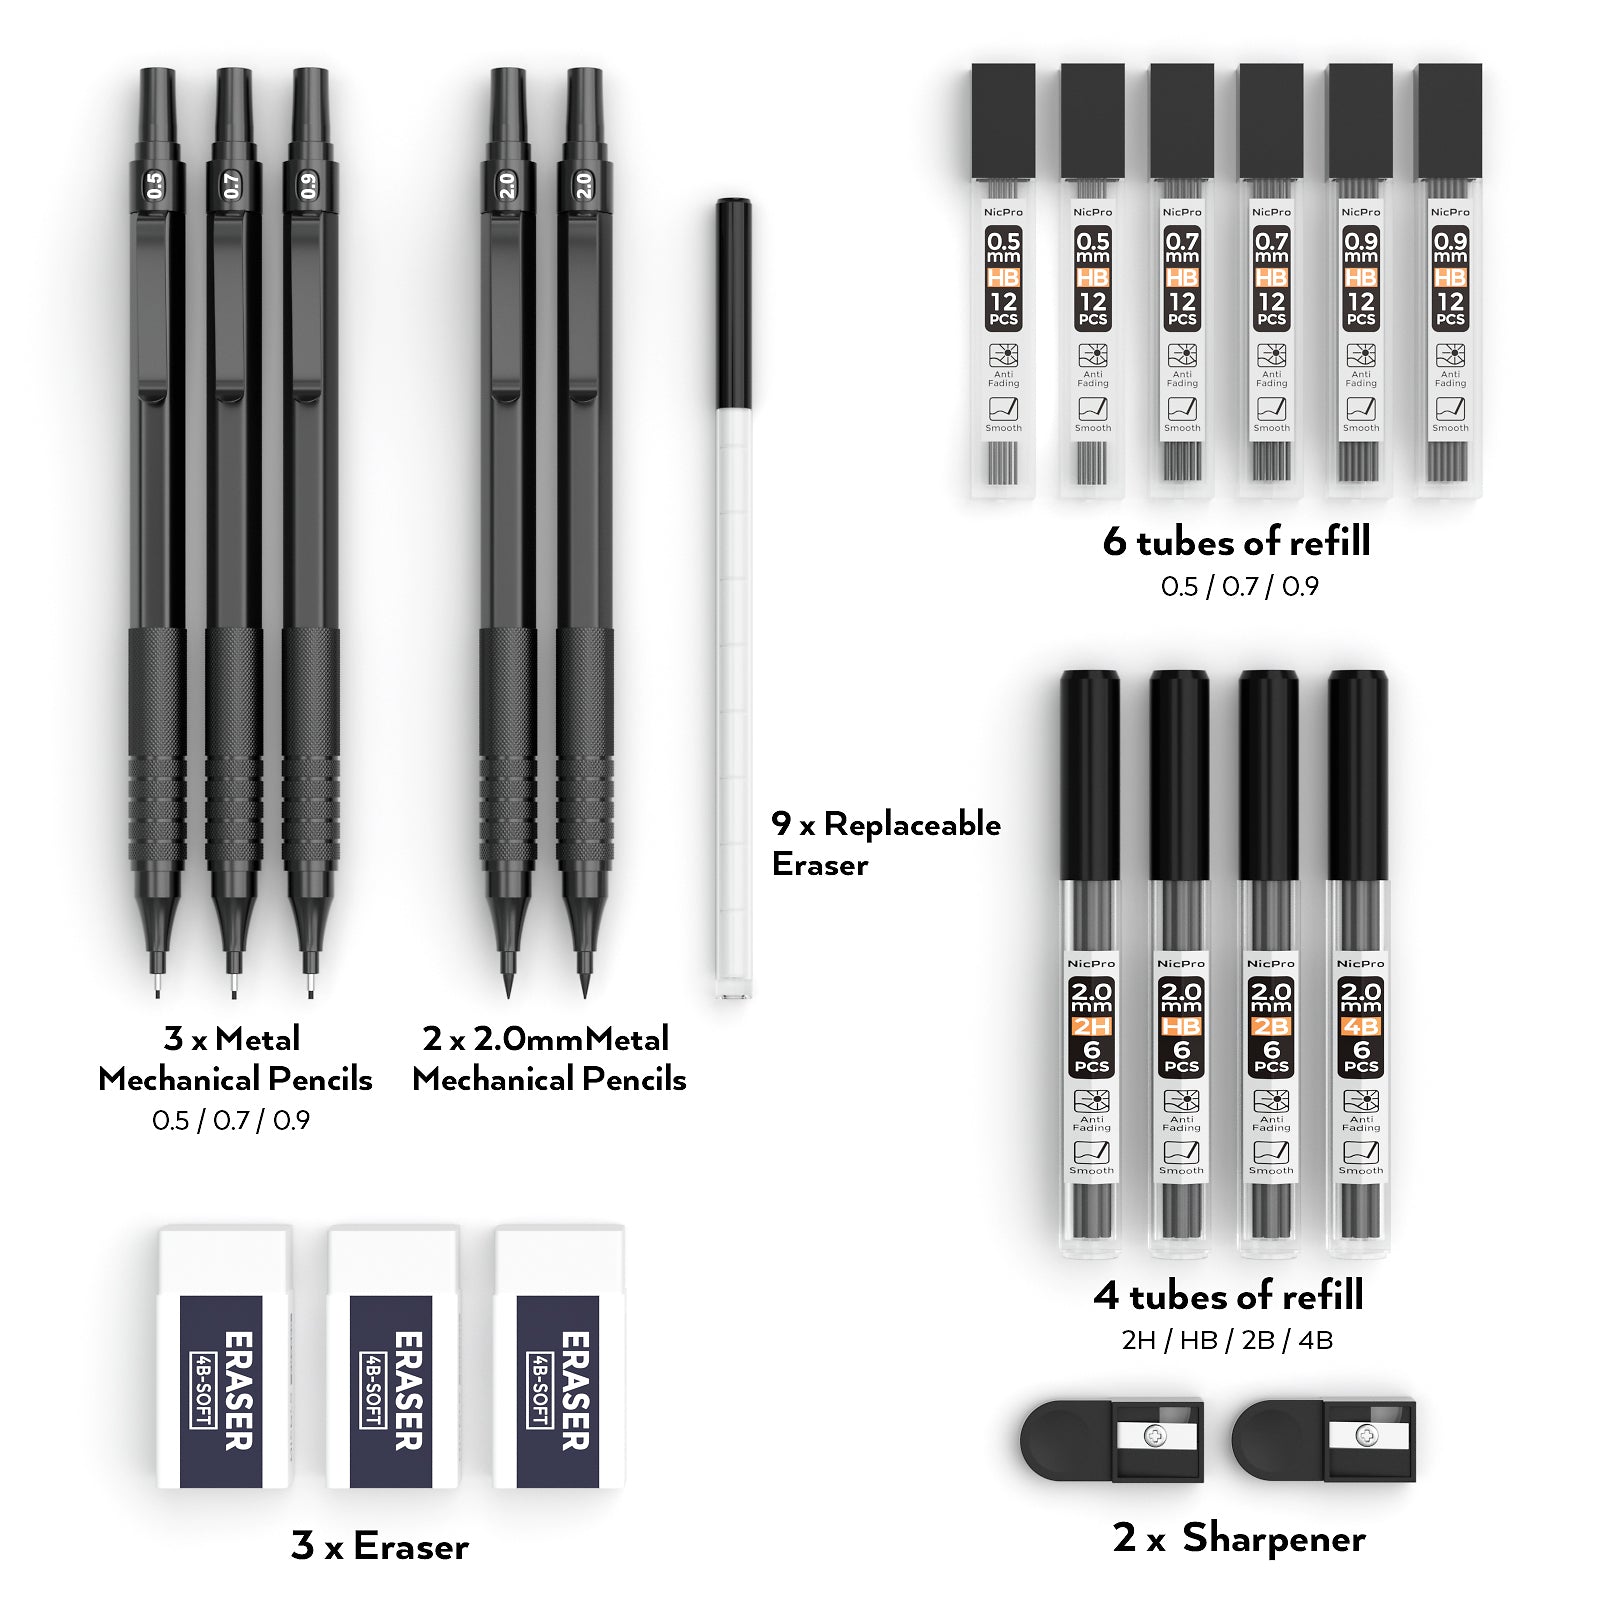 Nicpro 5 PCS Art Mechanical Pencil Set with Case, 3 PCS Metal Drafting Pencils 0.5, 0.7, 0.9 mm & 2PCS 2mm Graphite Lead Holder(4B 2B HB 2H), Lead Refills, Erasers for Drawing Writing Sketching, Black